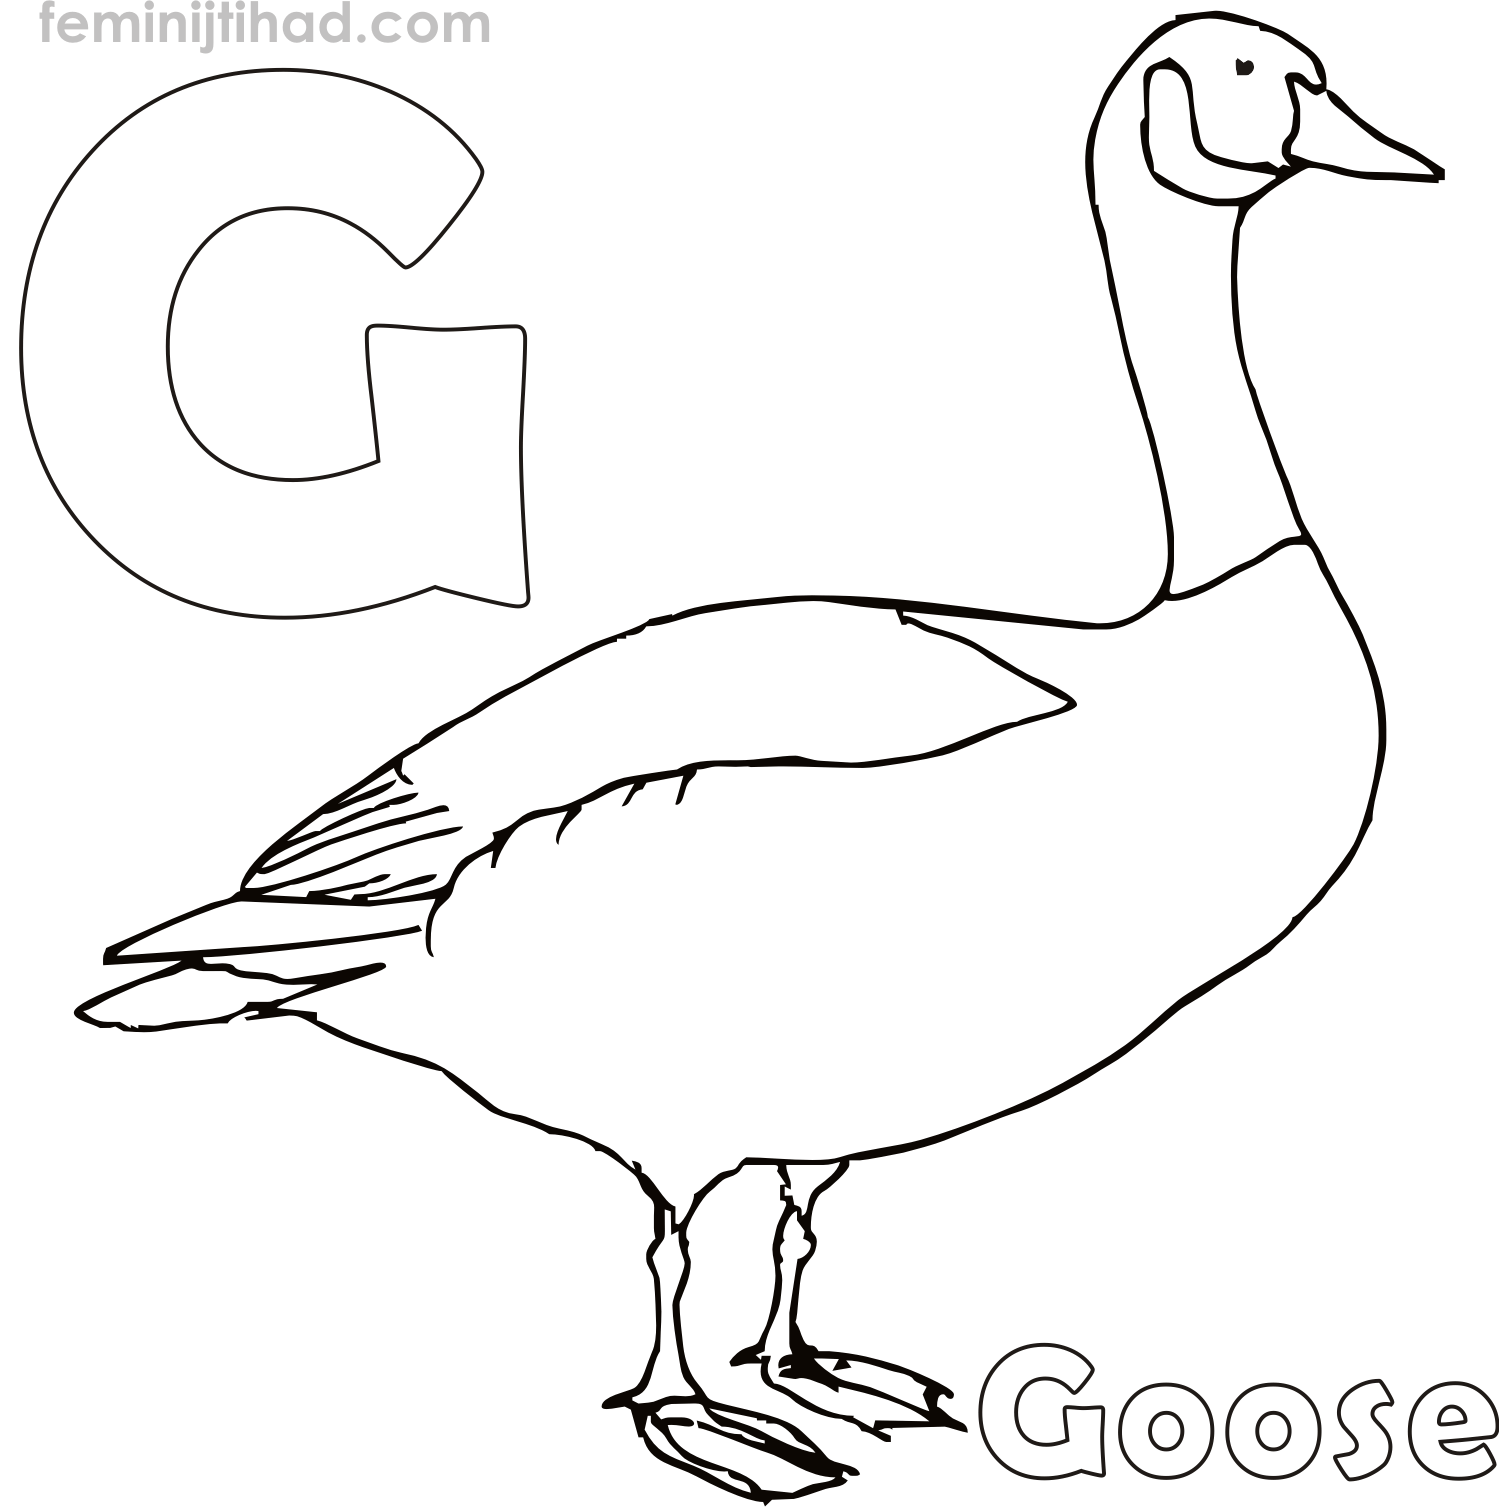 Printable Goose Coloring Pages | Animal coloring pages, Coloring pages,  Coloring pictures